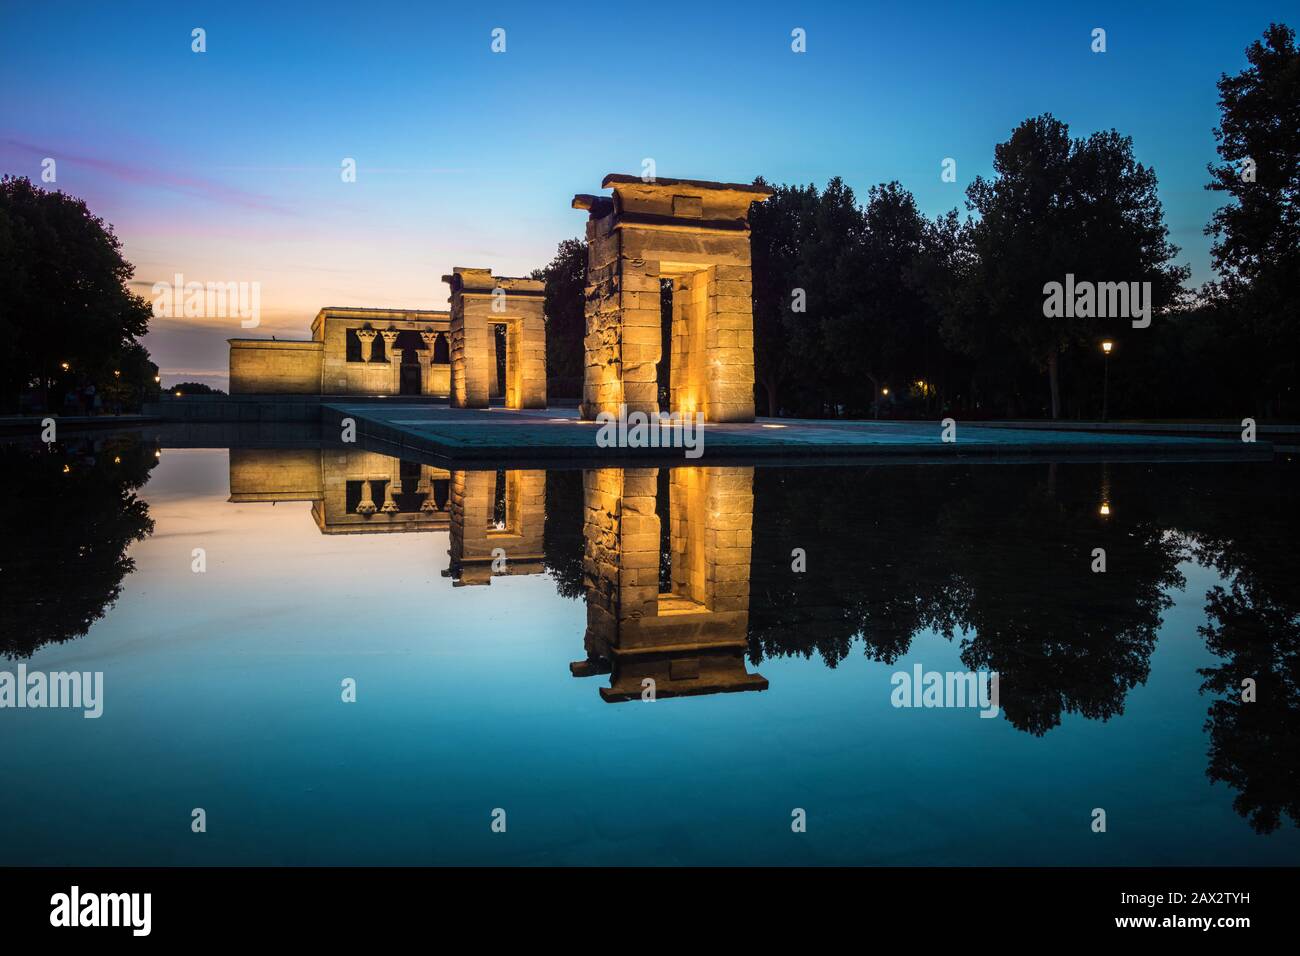 Temple of Debod at dusk in Madrid, Spain. Stock Photo